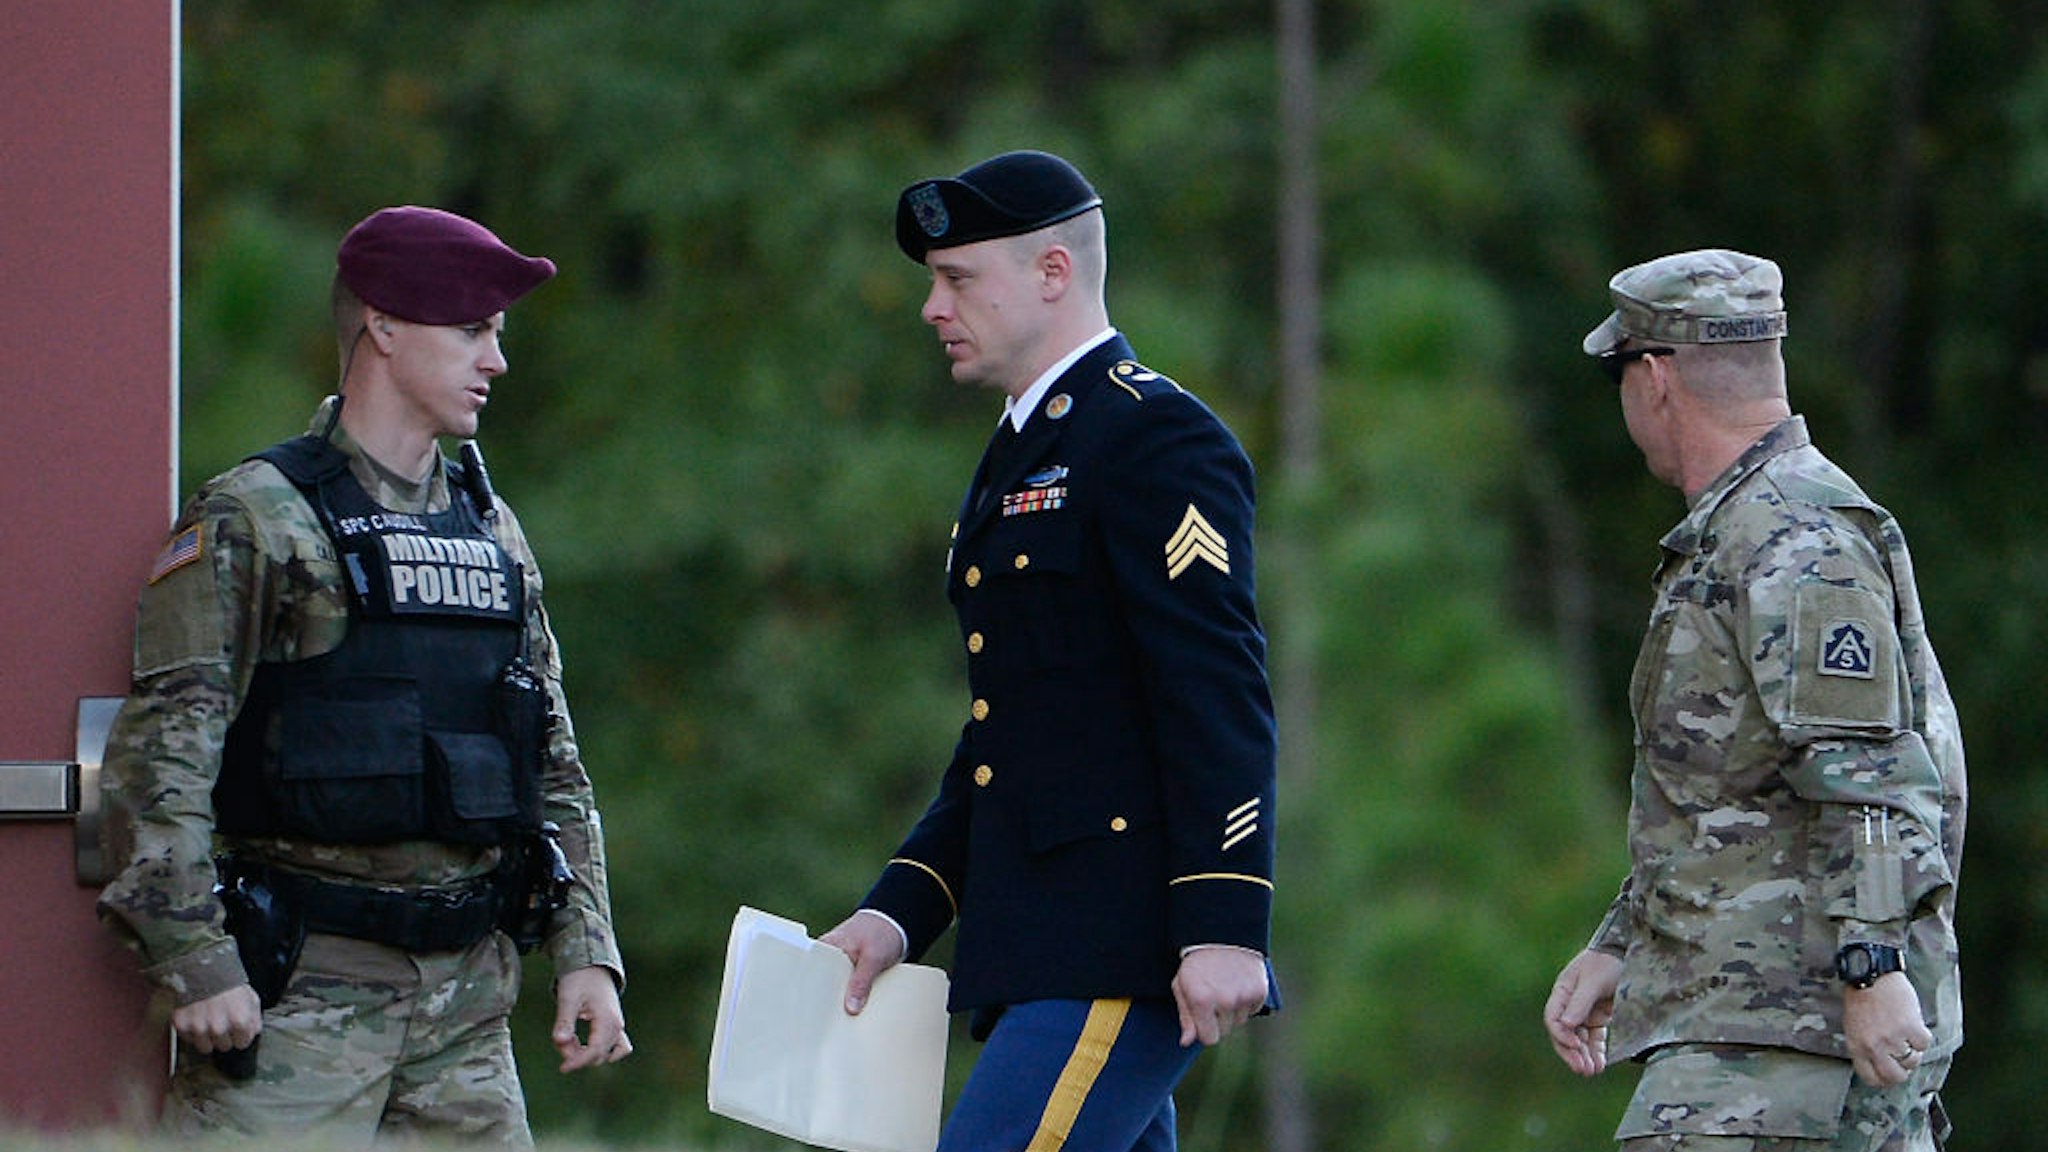 FORT BRAGG, NC - OCTOBER 30: U.S. Army Sgt. Robert Bowdrie 'Bowe' Bergdahl, 31 of Hailey, Idaho, (C) is escorted into the Ft. Bragg military courthouse for his sentencing hearing on October 30, 2017 in Ft. Bragg, North Carolina. Bergdahl pled guilty to desertion and misbehavior before the enemy stemming from his decision to leave his outpost in 2009, which landed him five years in Taliban captivity.